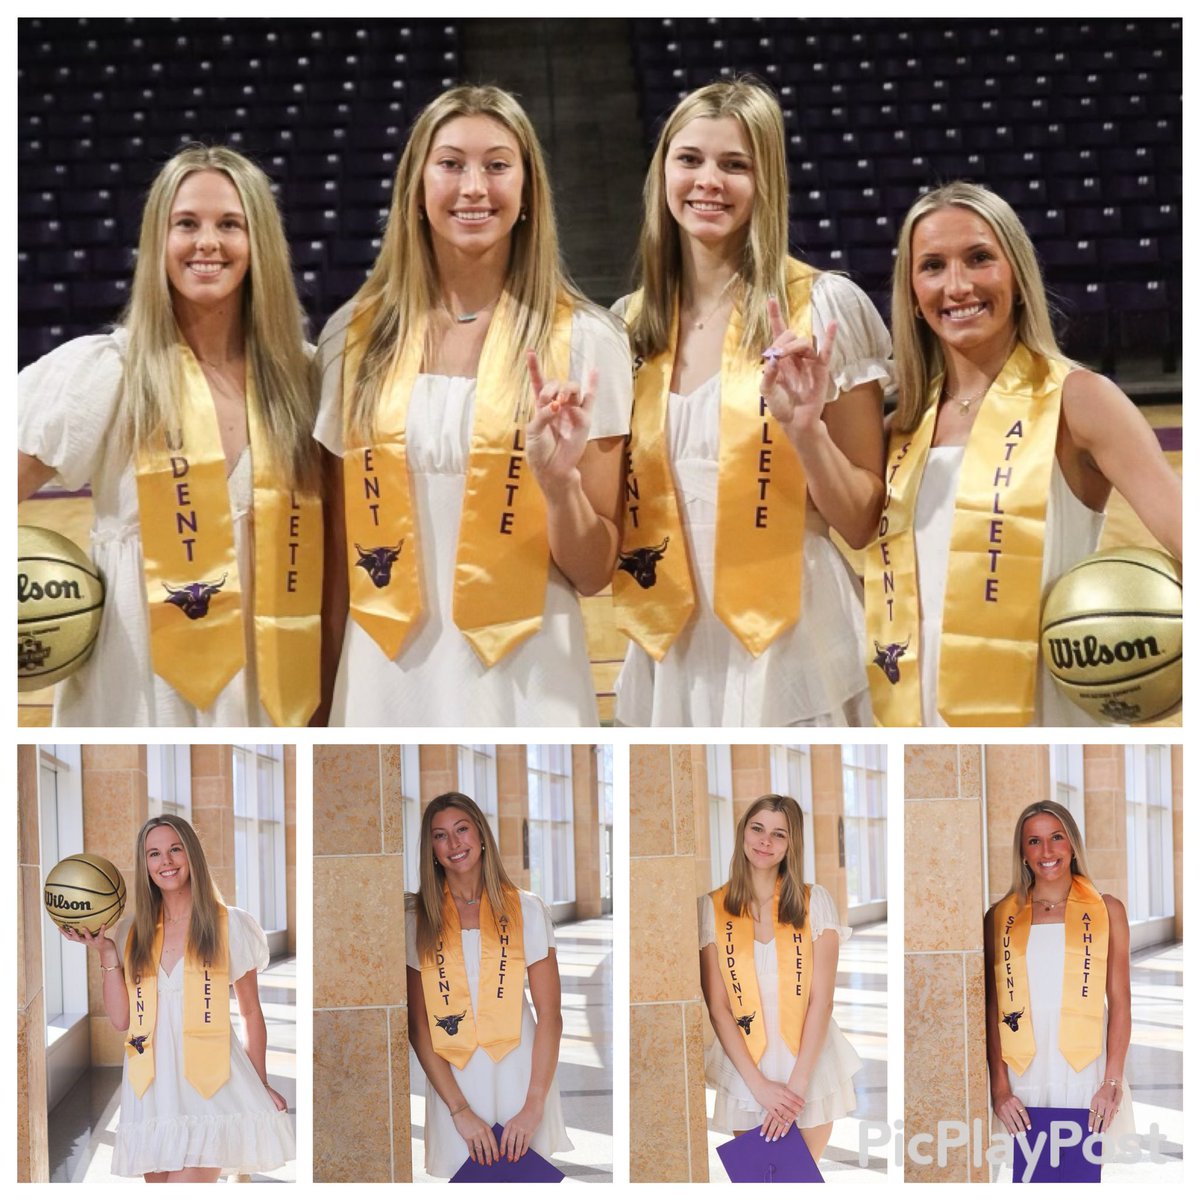 It’s Graduation Day!! Big congrats to Taylor, Emily, Grace, and Joey! 🎓😈👏 Once a Mav, Always a Mav 💜 #MavFam #leavealegacy